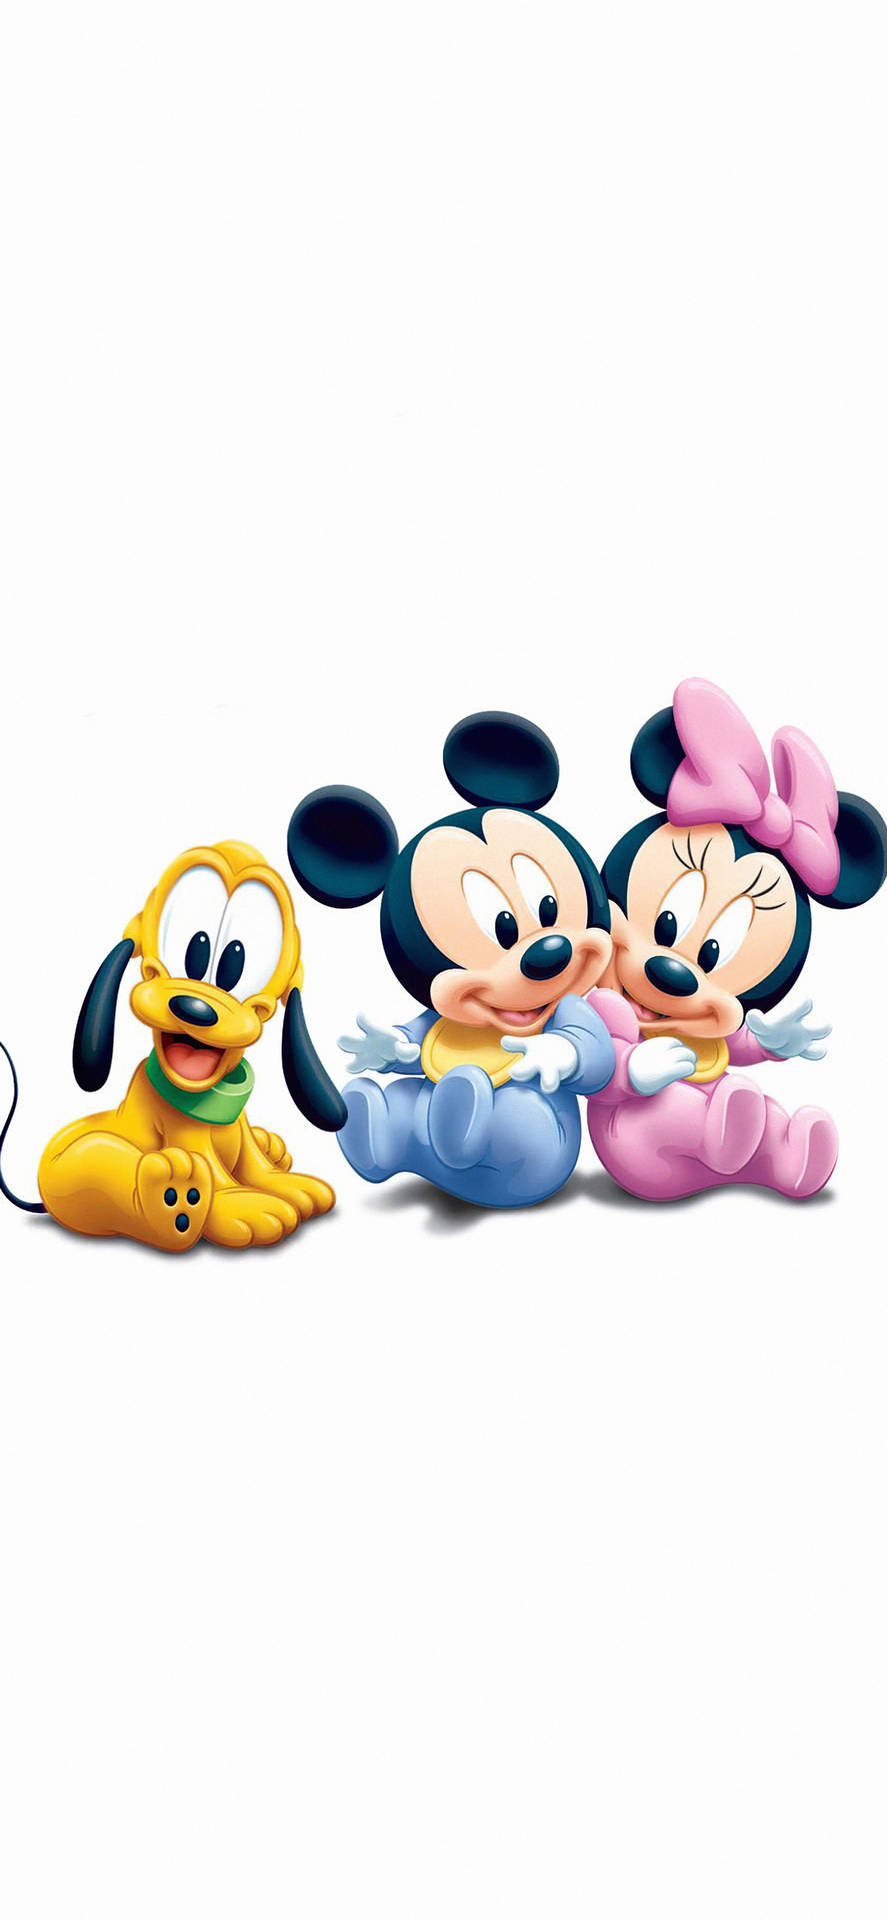 Top 999+ Cute Disney Wallpapers Full HD, 4K✅Free to Use